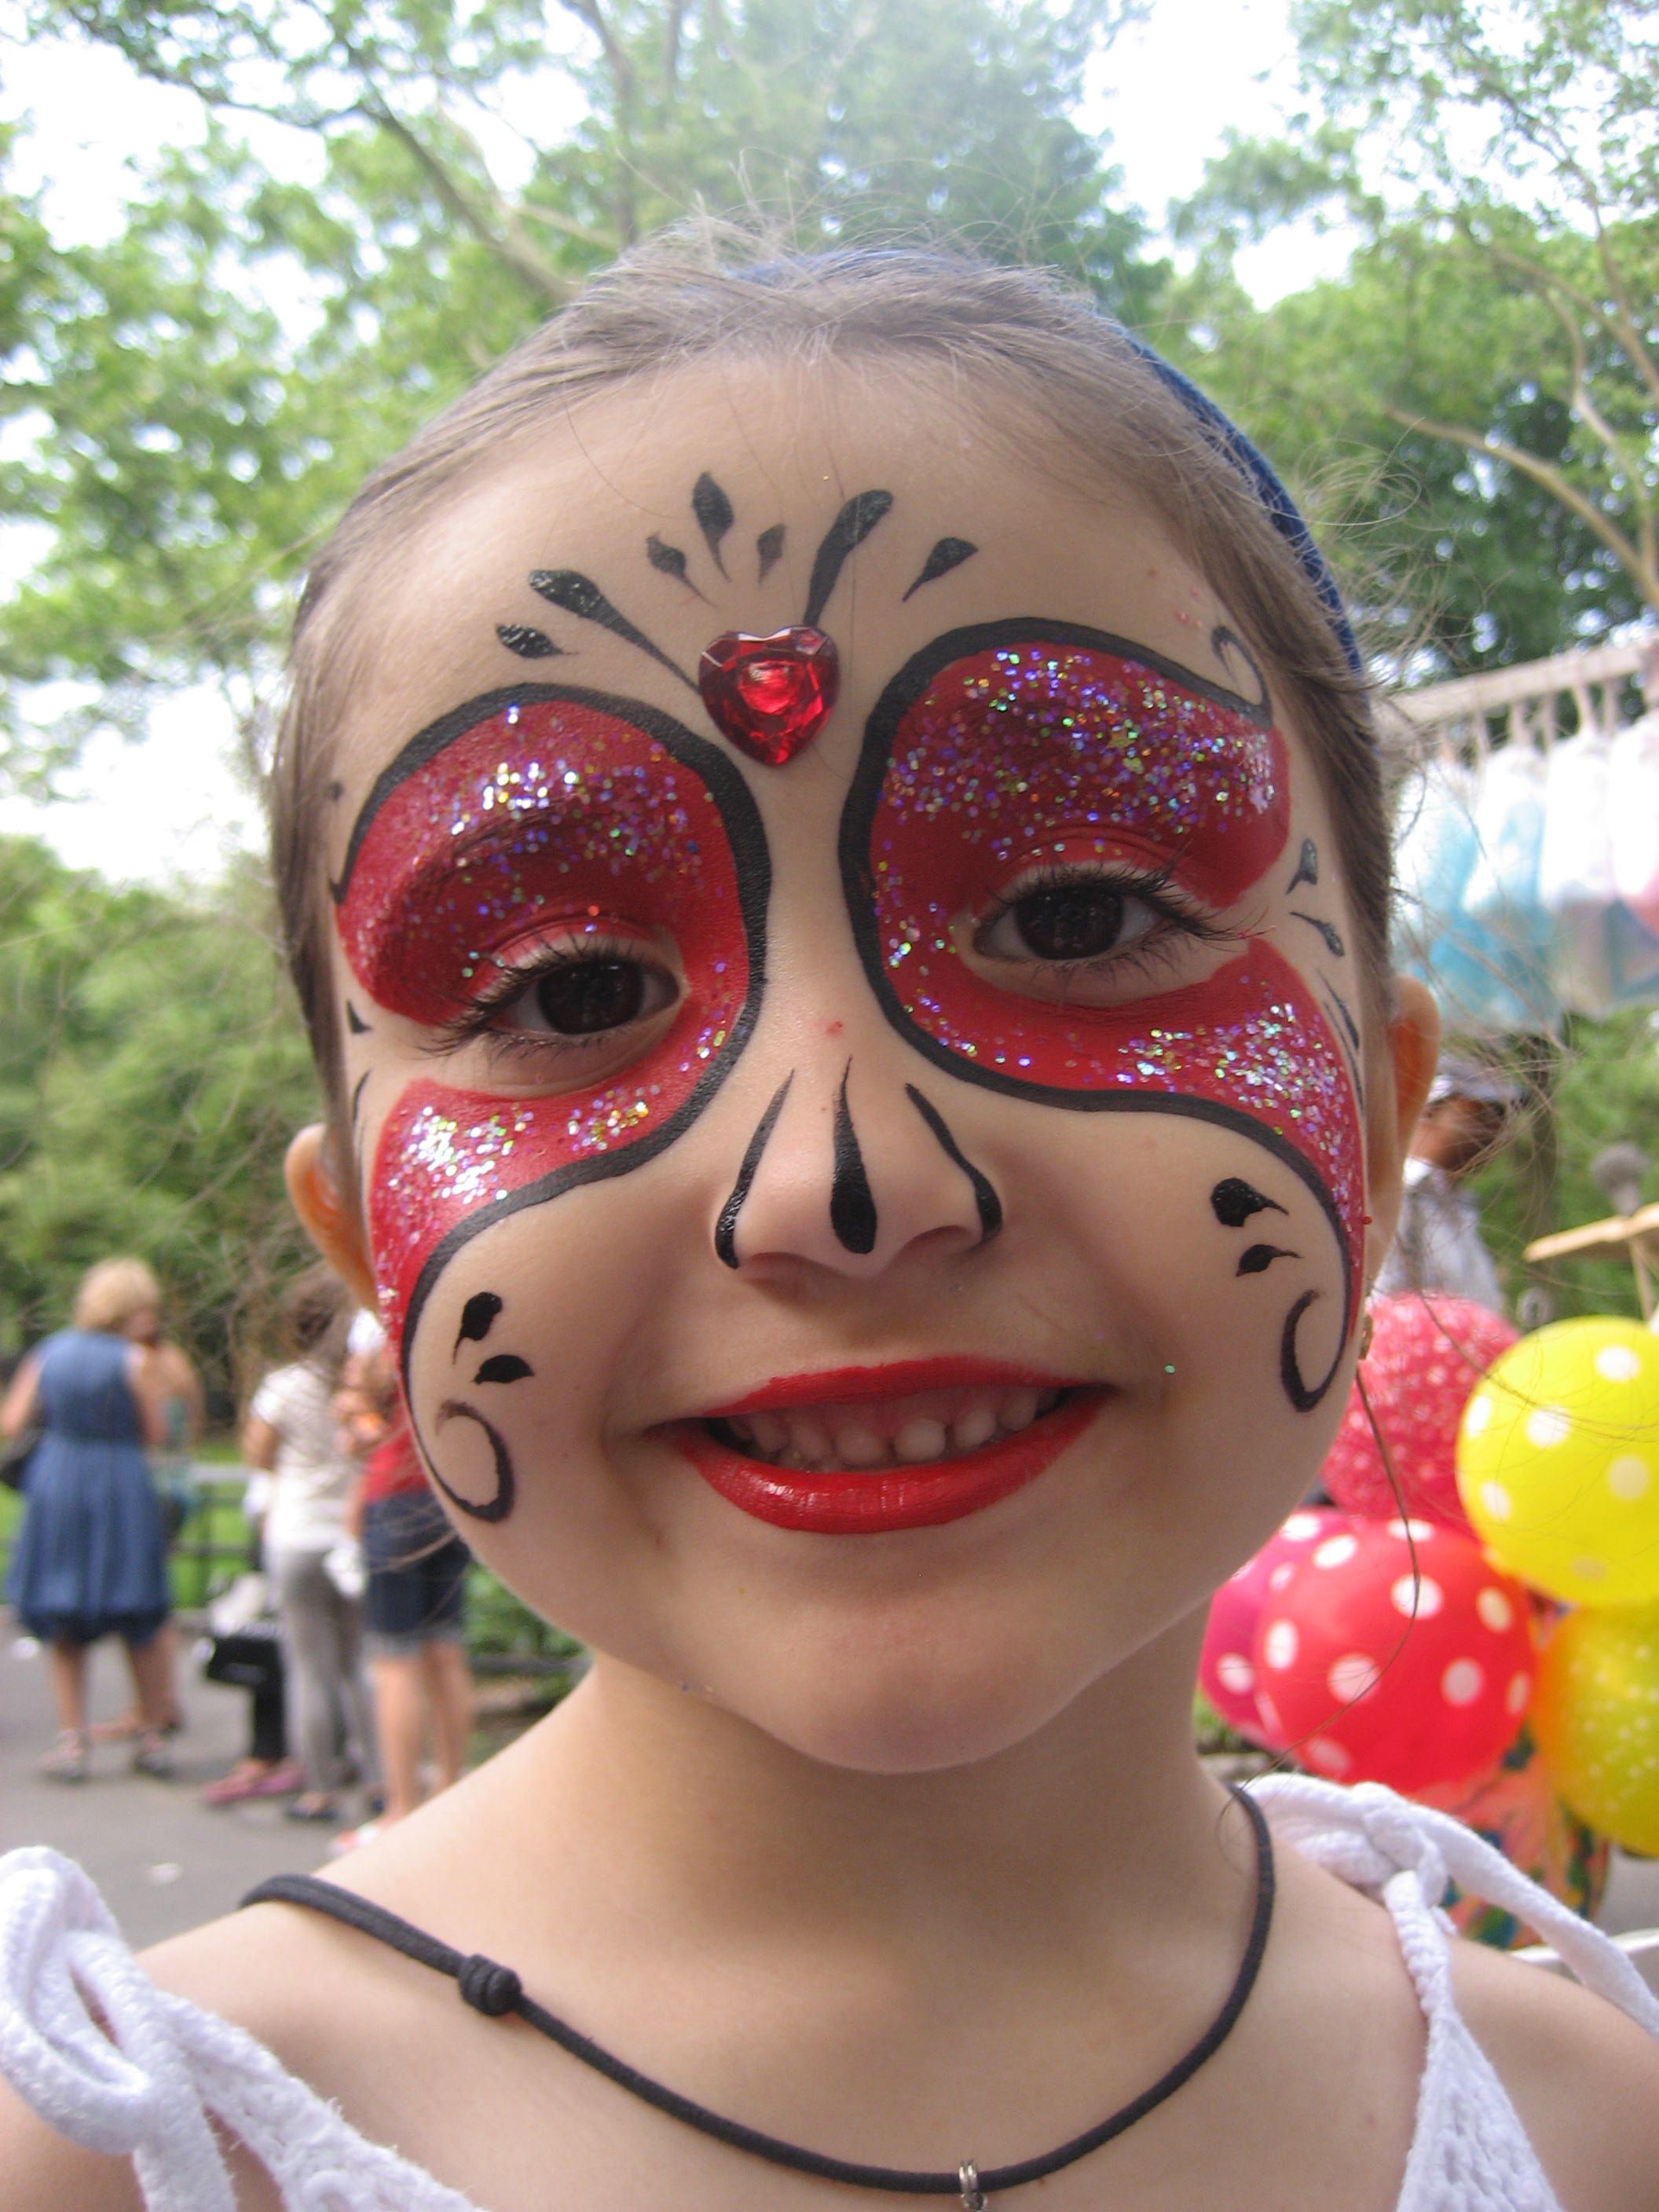 Before You Select a Face Painter For Your Event Here Are 7 ...